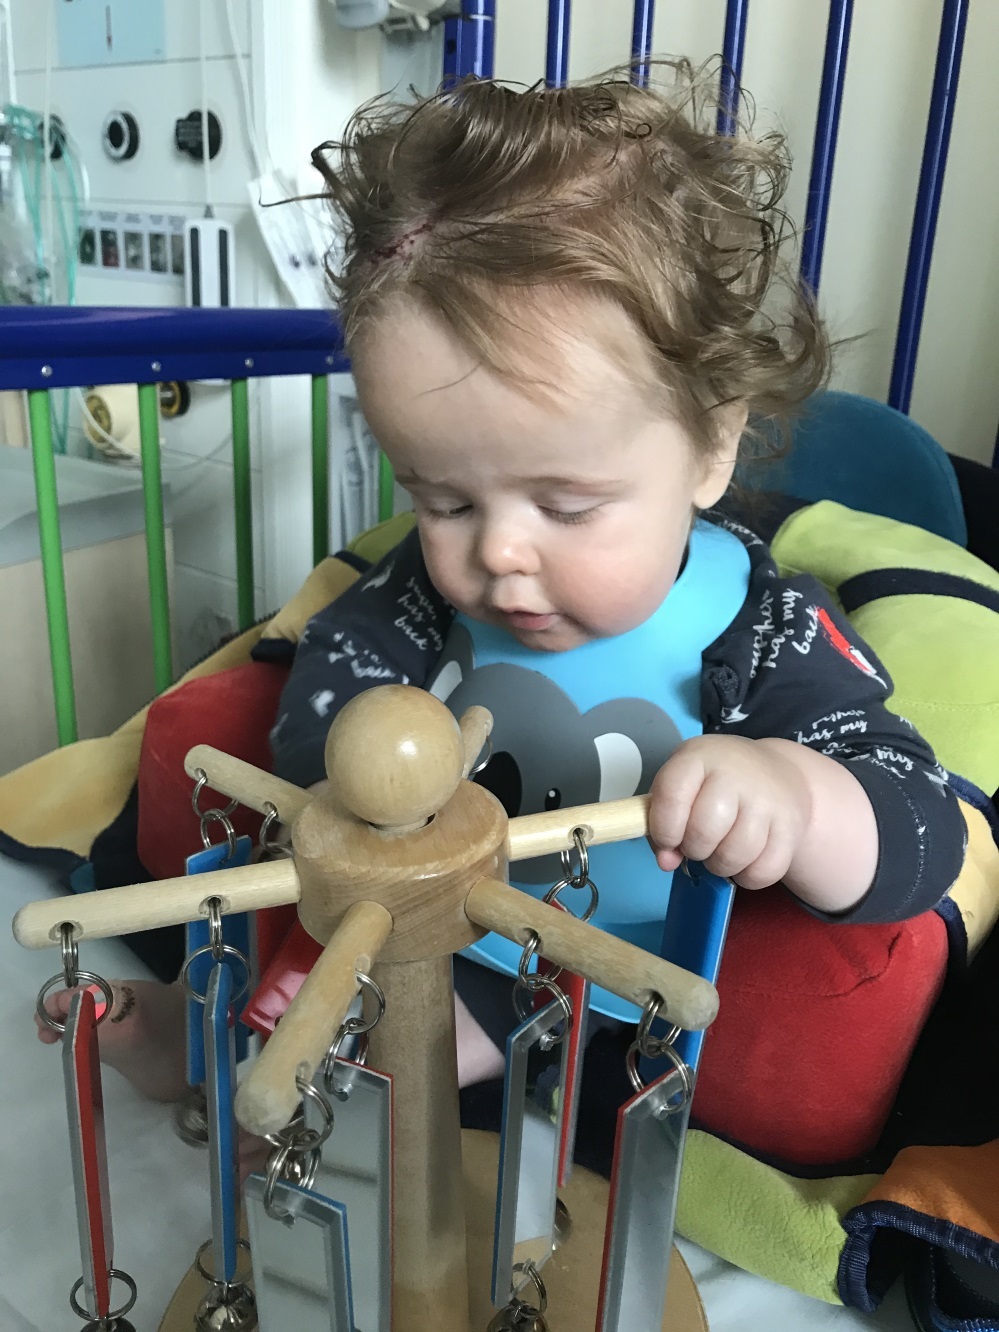 Joseph playing with toys in hospital